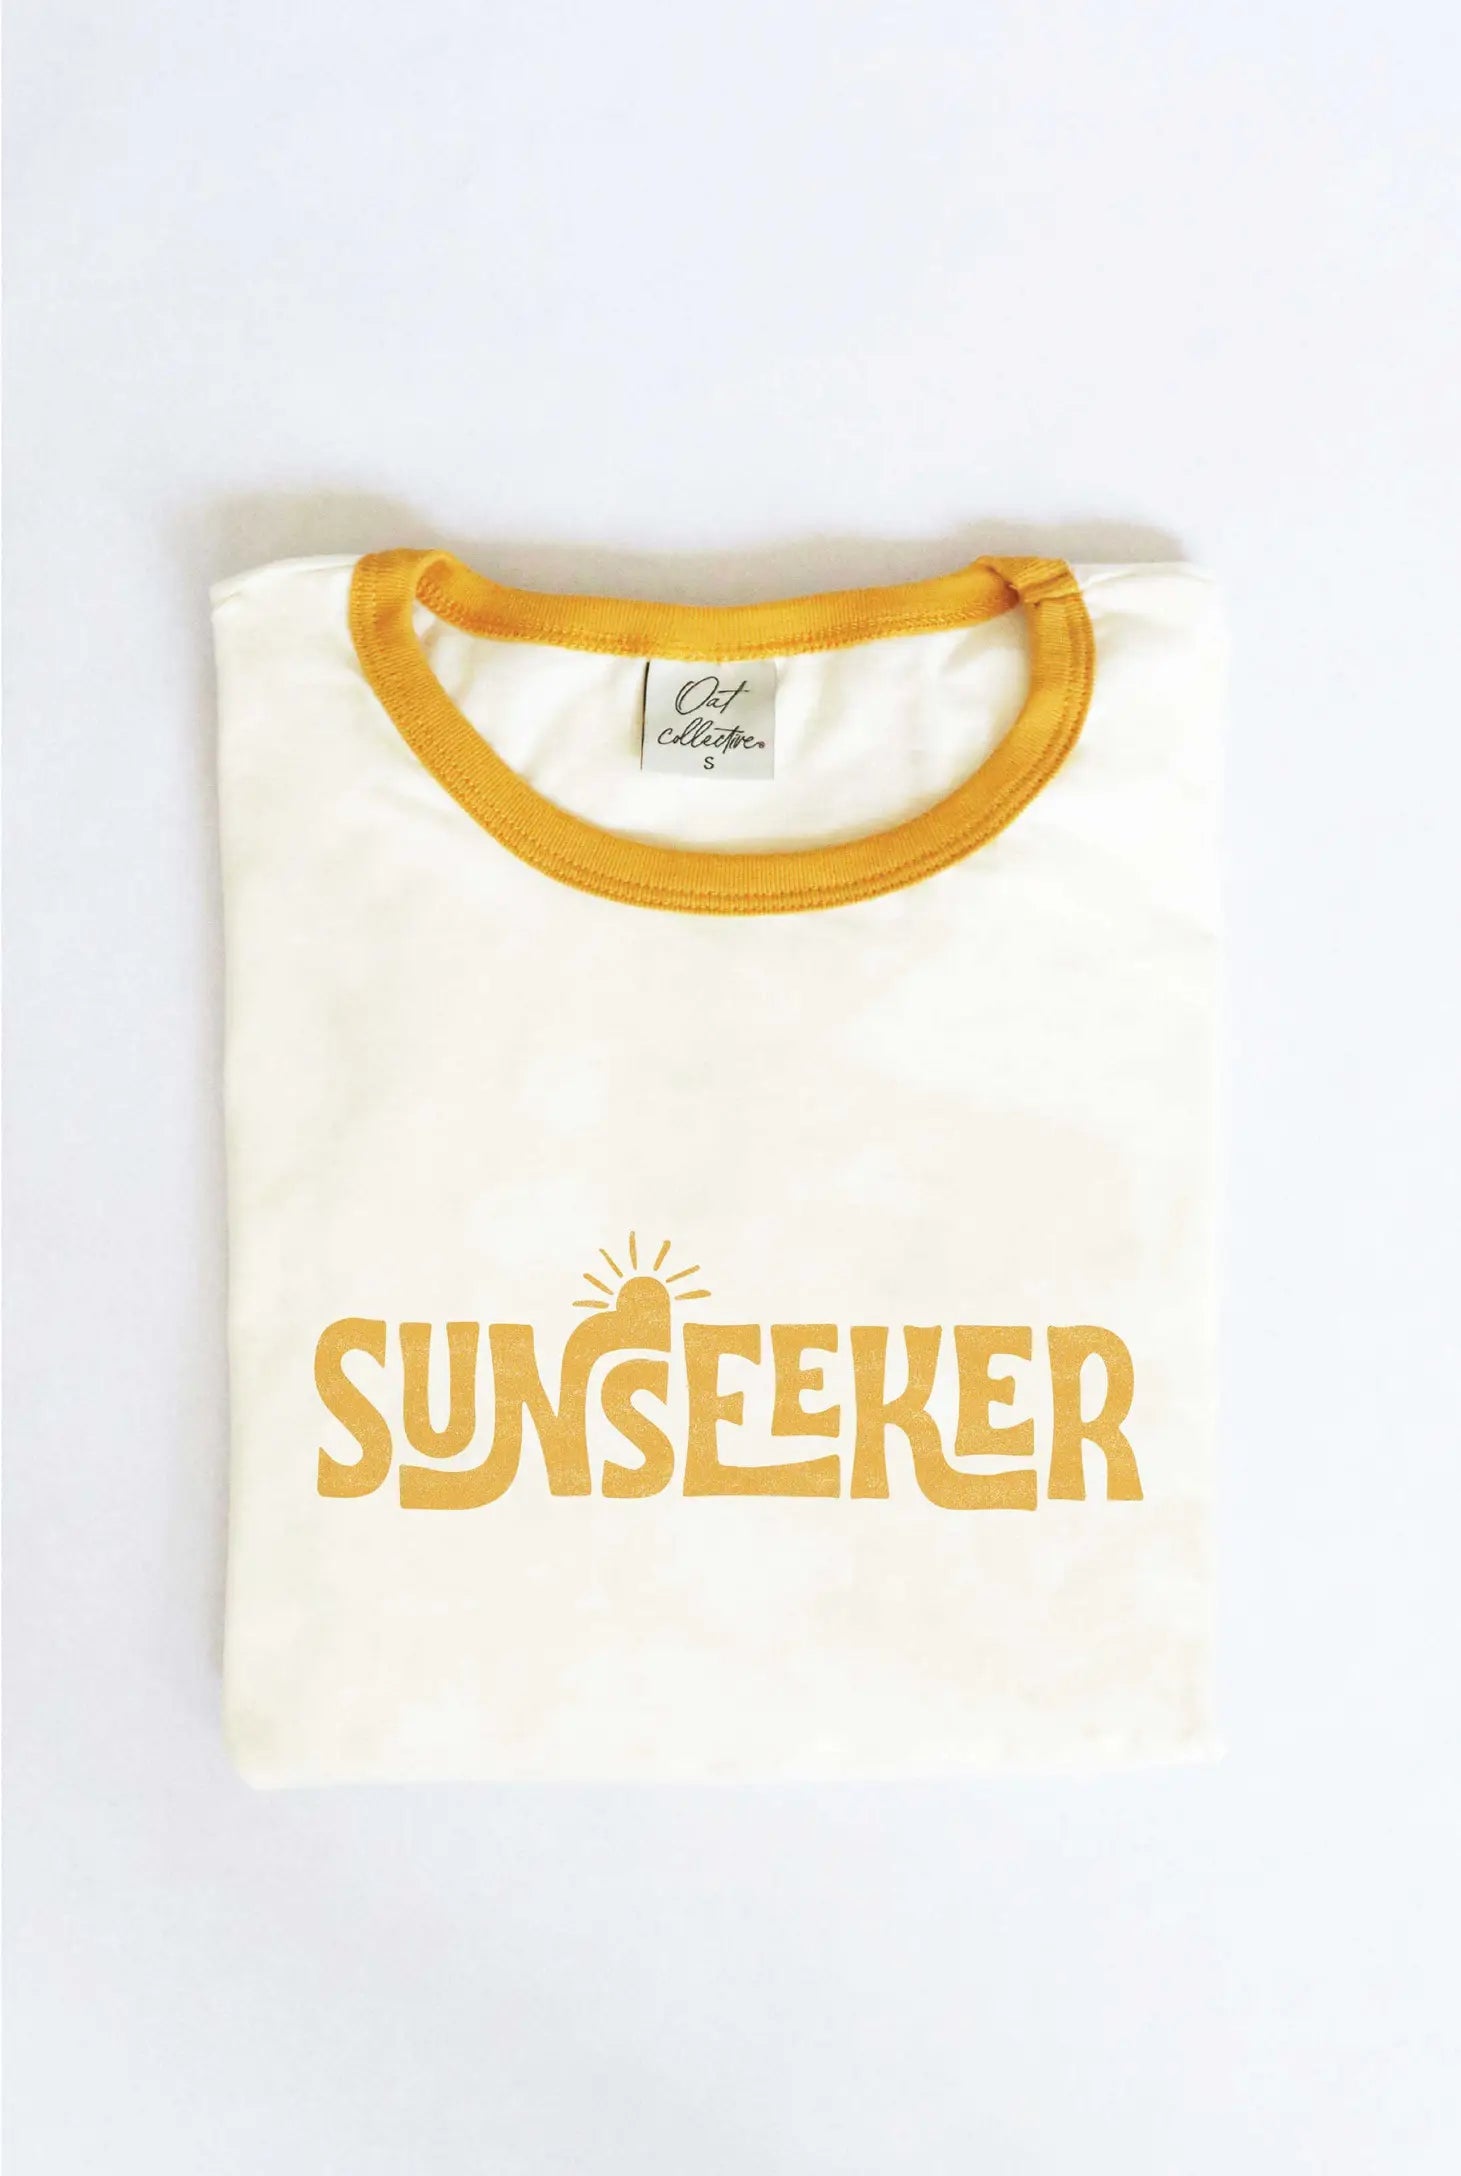 Sunseeker Ringer Graphic T-Shirt - The Riviera Towel Company